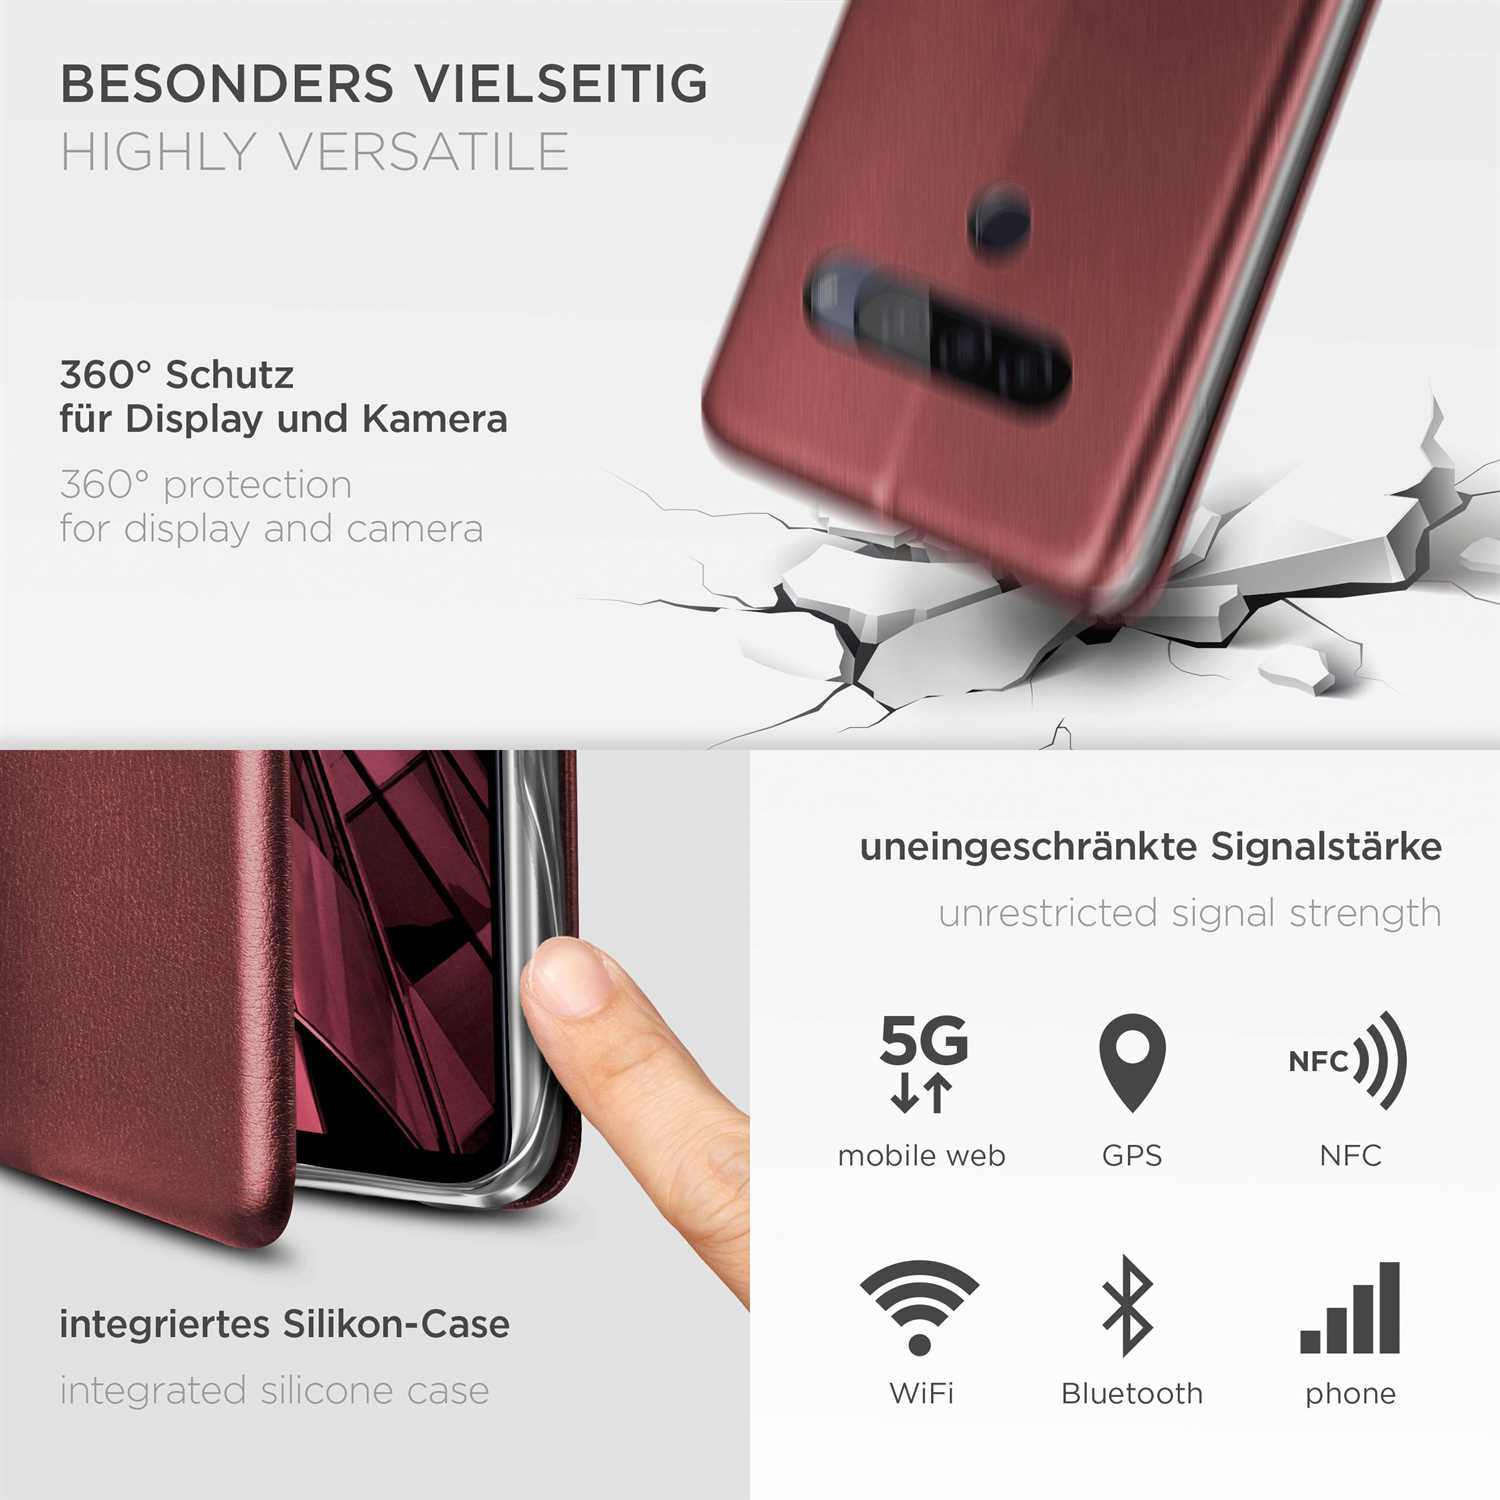 ONEFLOW Business Case, Flip Red ThinQ, Burgund LG, G8s - Cover